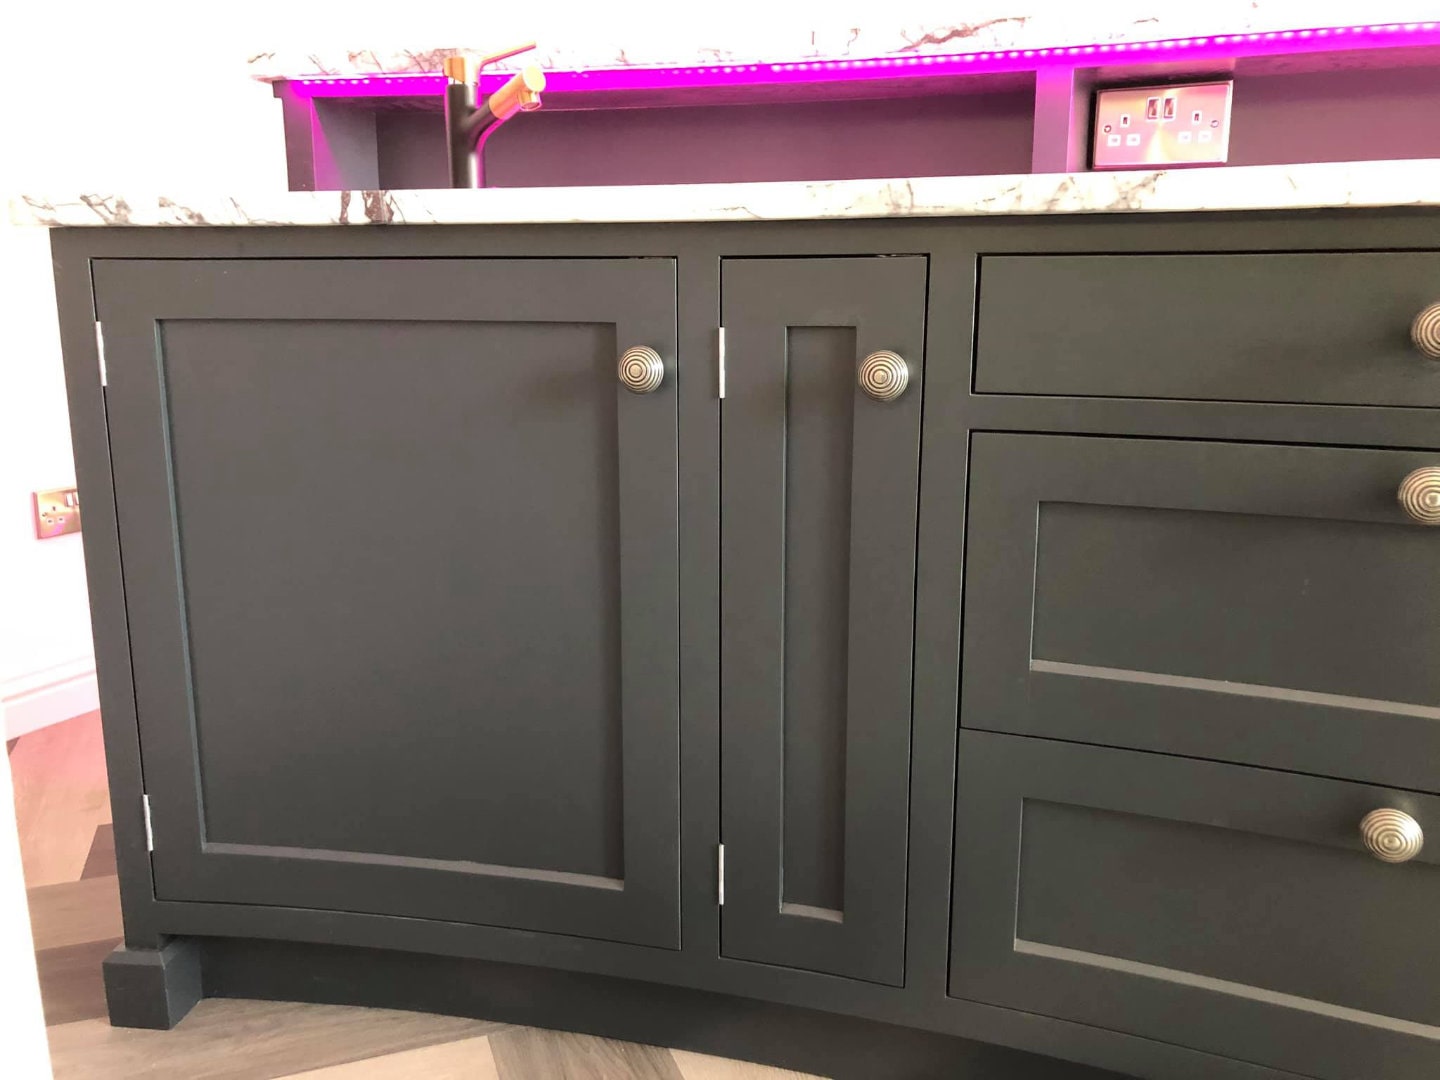 Storage cabinets fitted beneath a bespoke drinks bar.